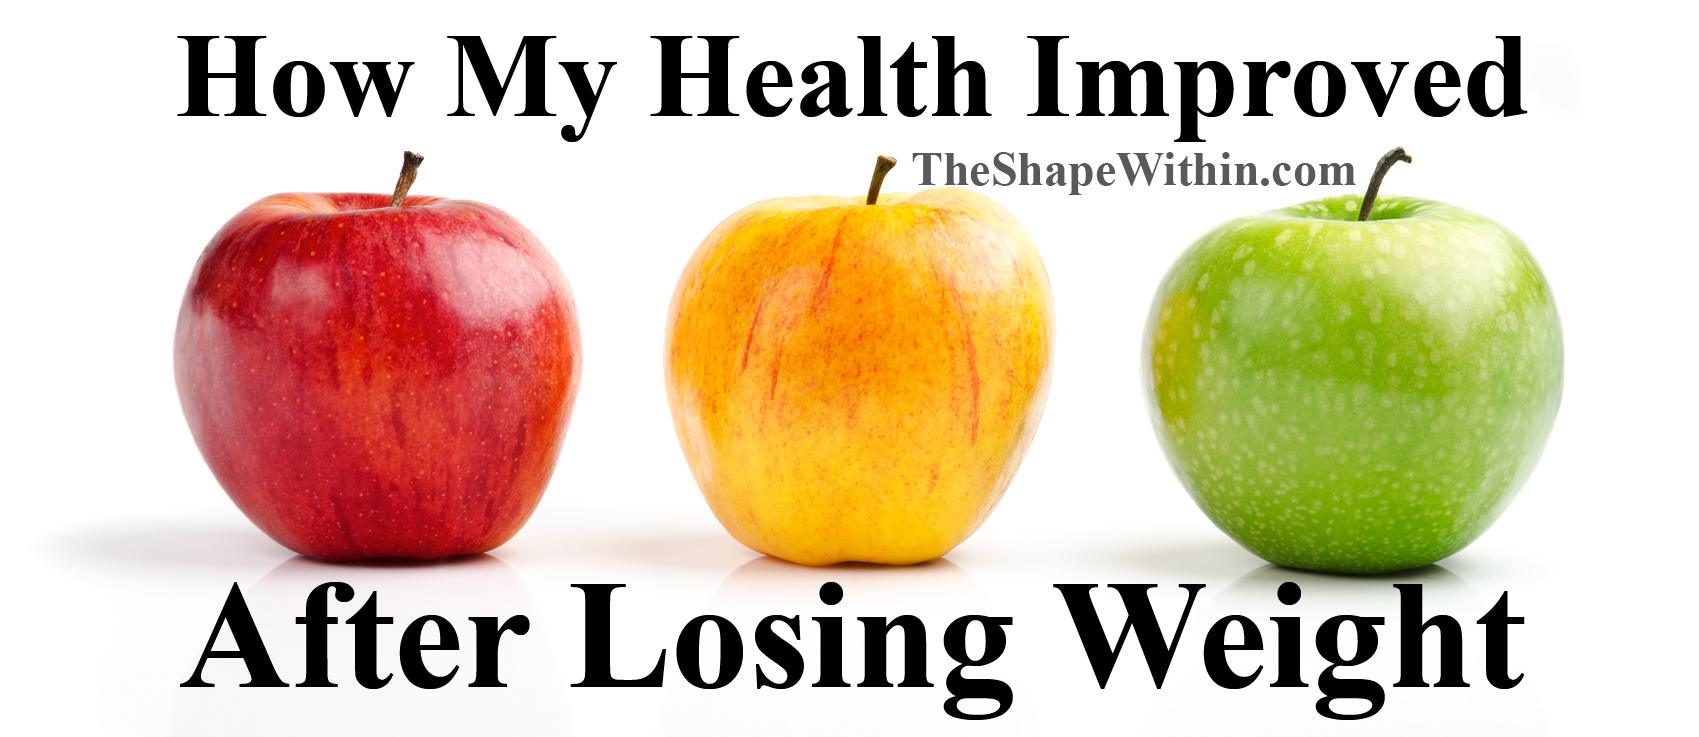 Three apples arranged from red to green, which represent the health benefits of losing weight that I experienced